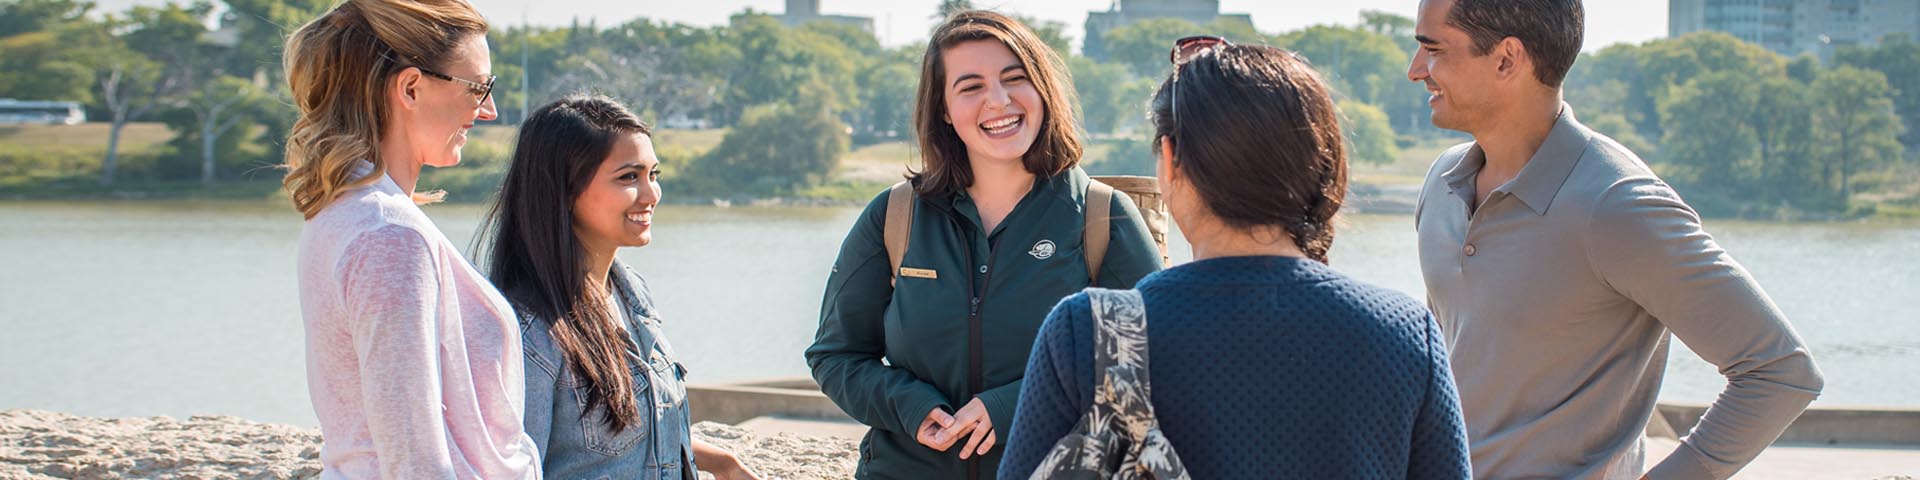 A Parks Canada employee talking to 4 visitors on the waterfront at The Forks National Historic Site.